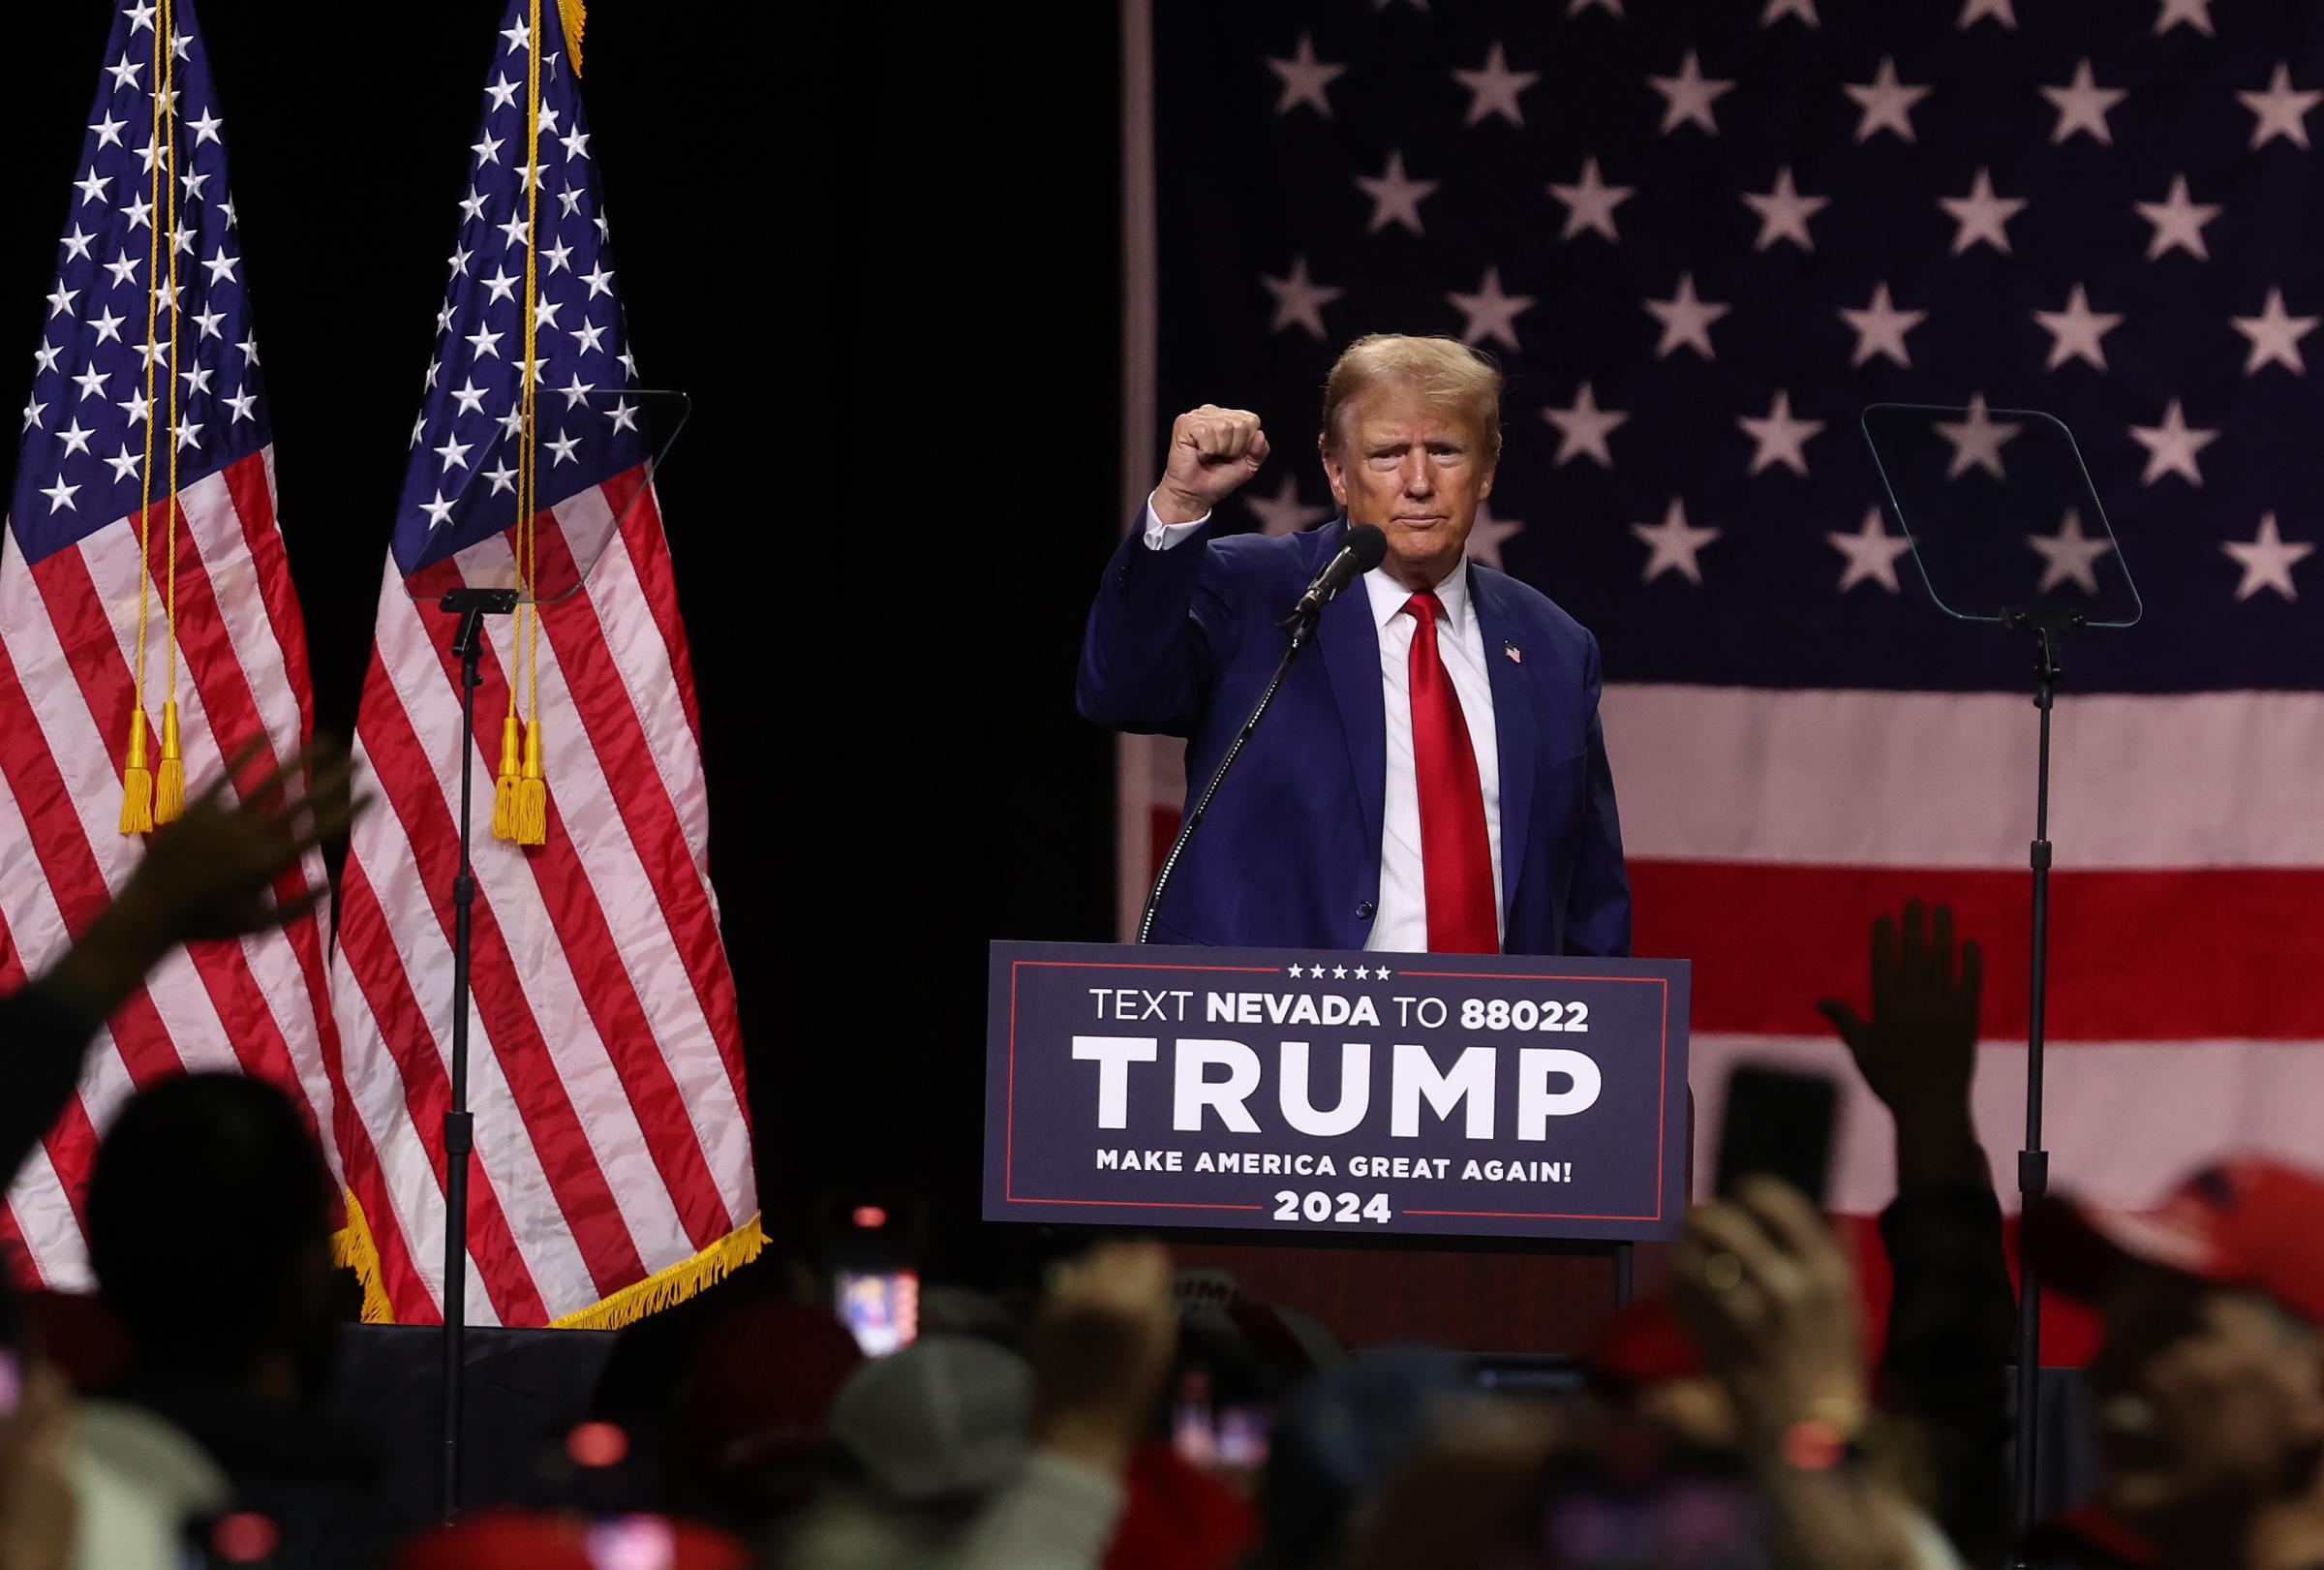 RENO, NEVADA - DECEMBER 17: Republican Presidential candidate former U.S. President Donald Trump gestures during a campaign rally at the Reno-Sparks Convention Center on December 17, 2023 in Reno, Nevada. Former U.S. President Trump held a campaign rally